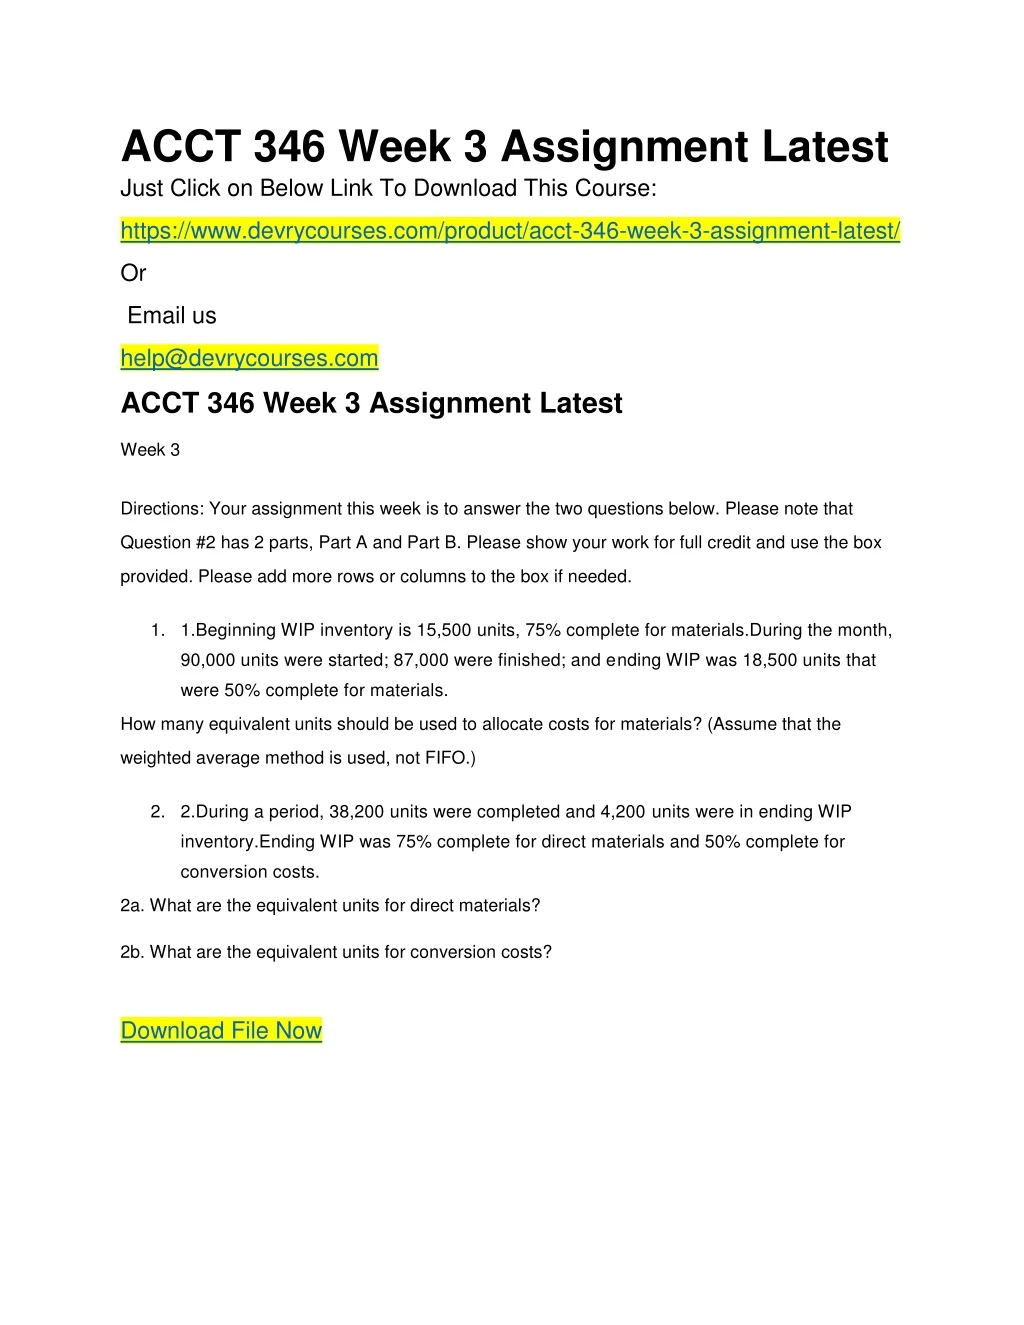 acct 346 week 3 assignment latest just click